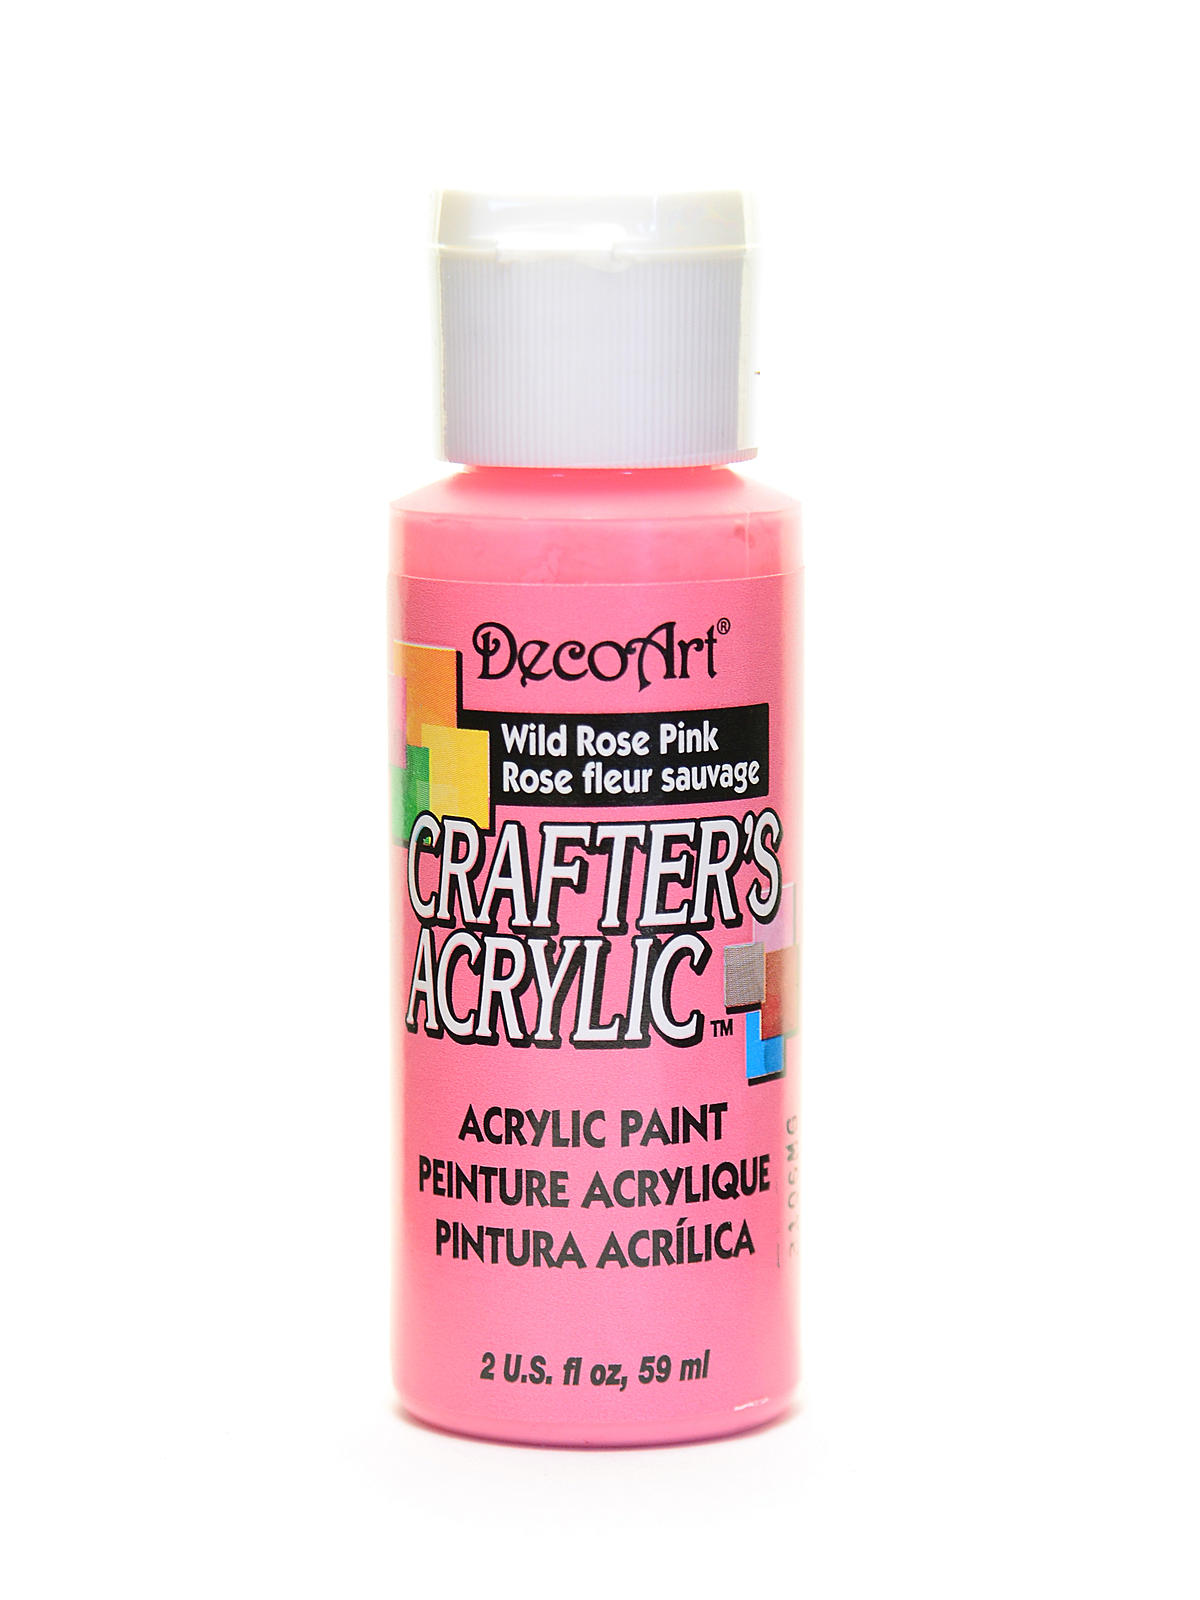 Crafters Acrylic 2 Oz Wild Rose Pink